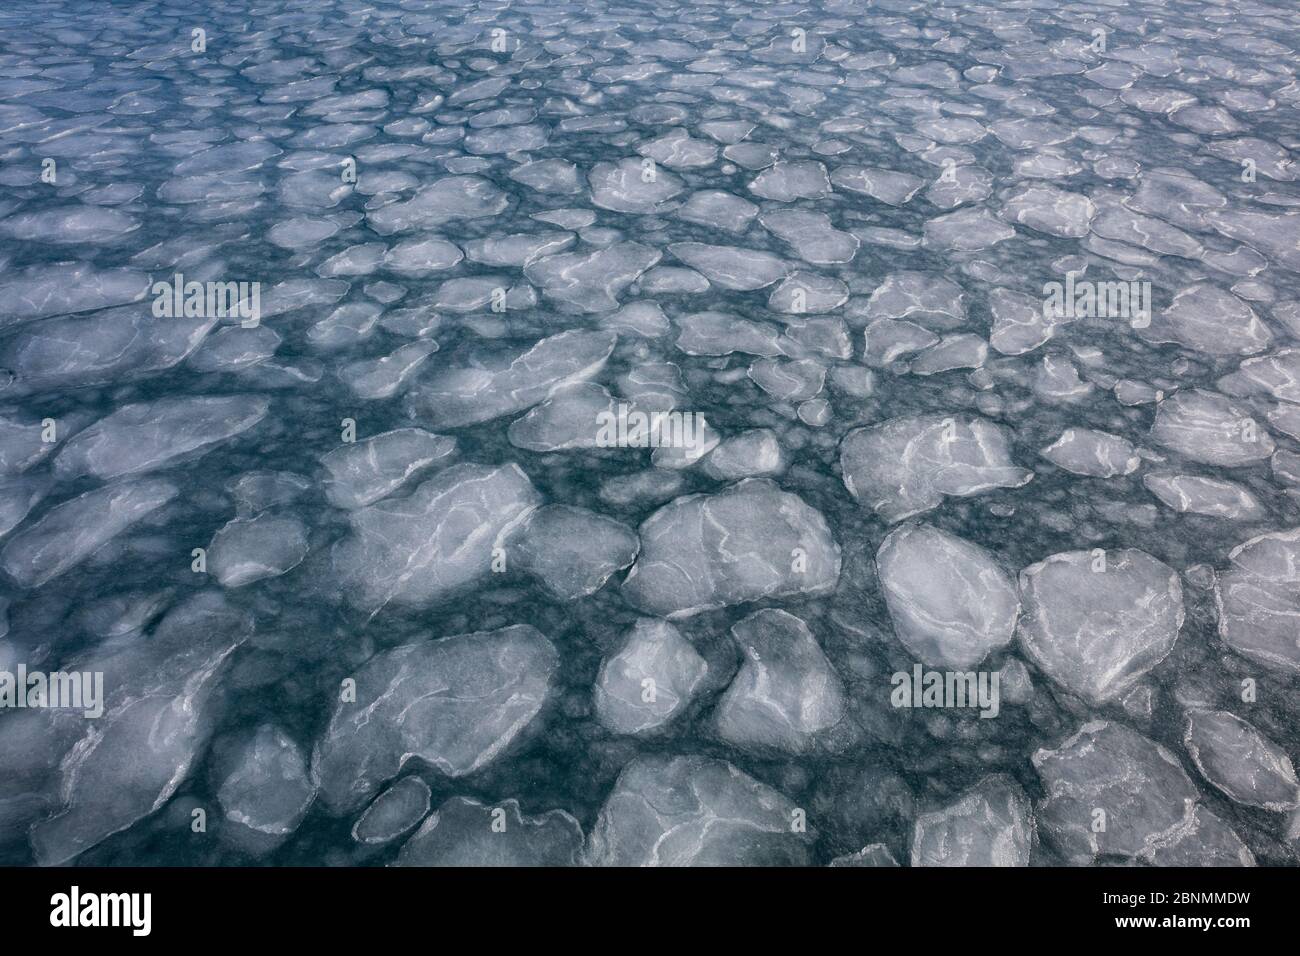 Pancake ice, early stage of formation of sea ice, late winter, Spitsbergen, Svalbard, Norway, April. Stock Photo